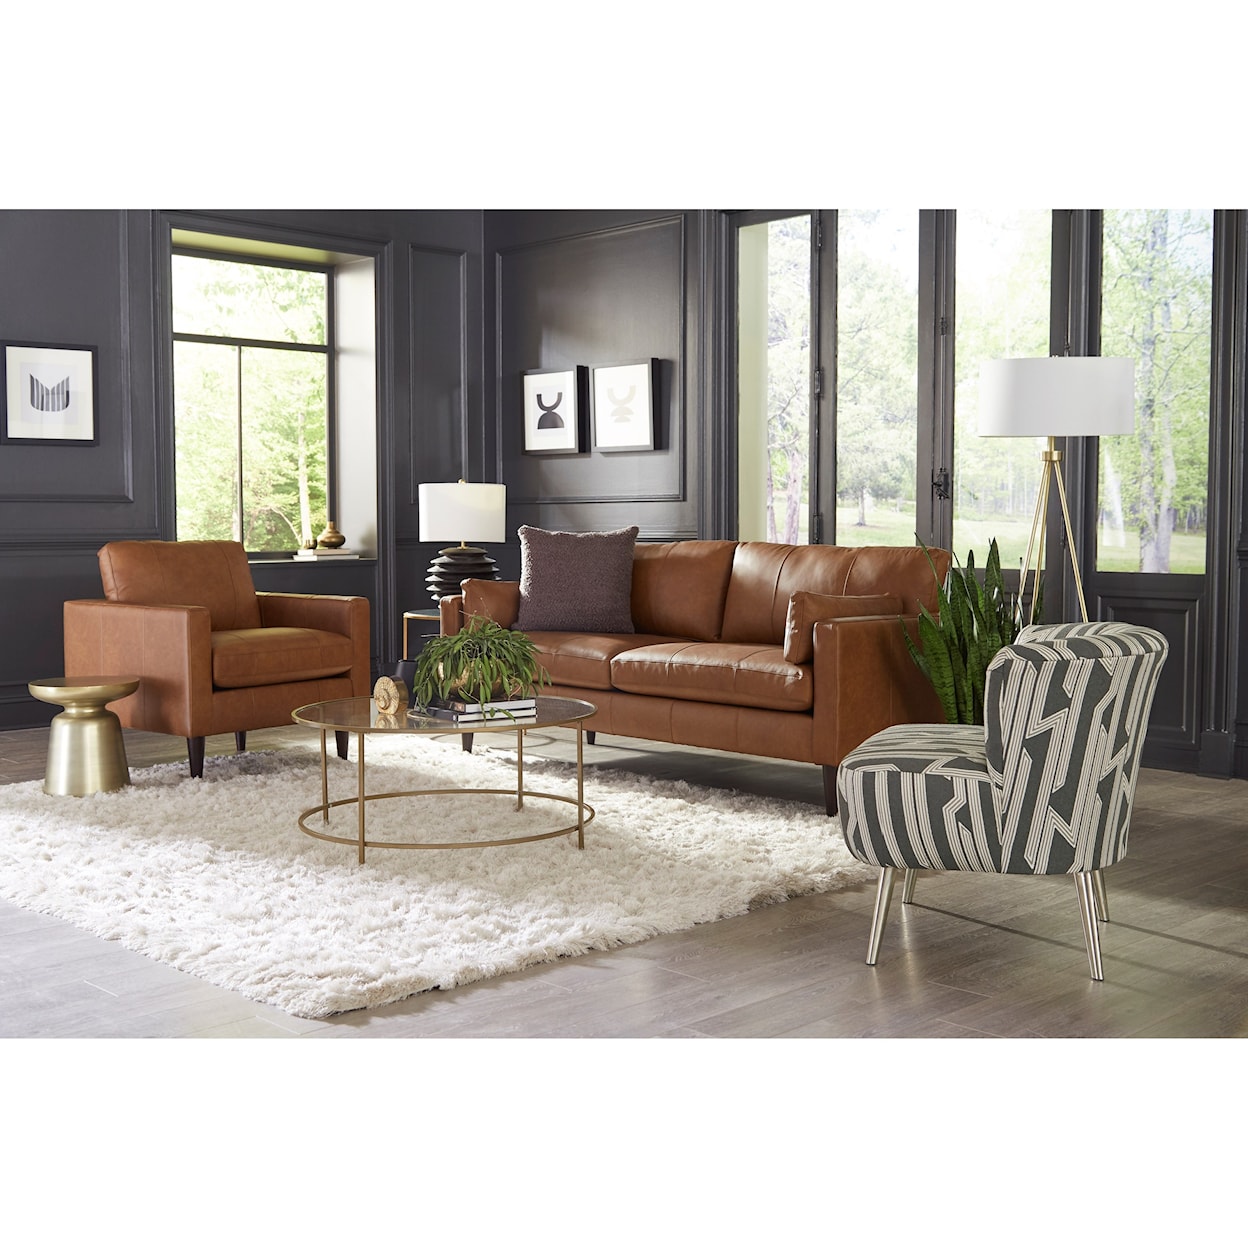 Best Home Furnishings Trafton Chair